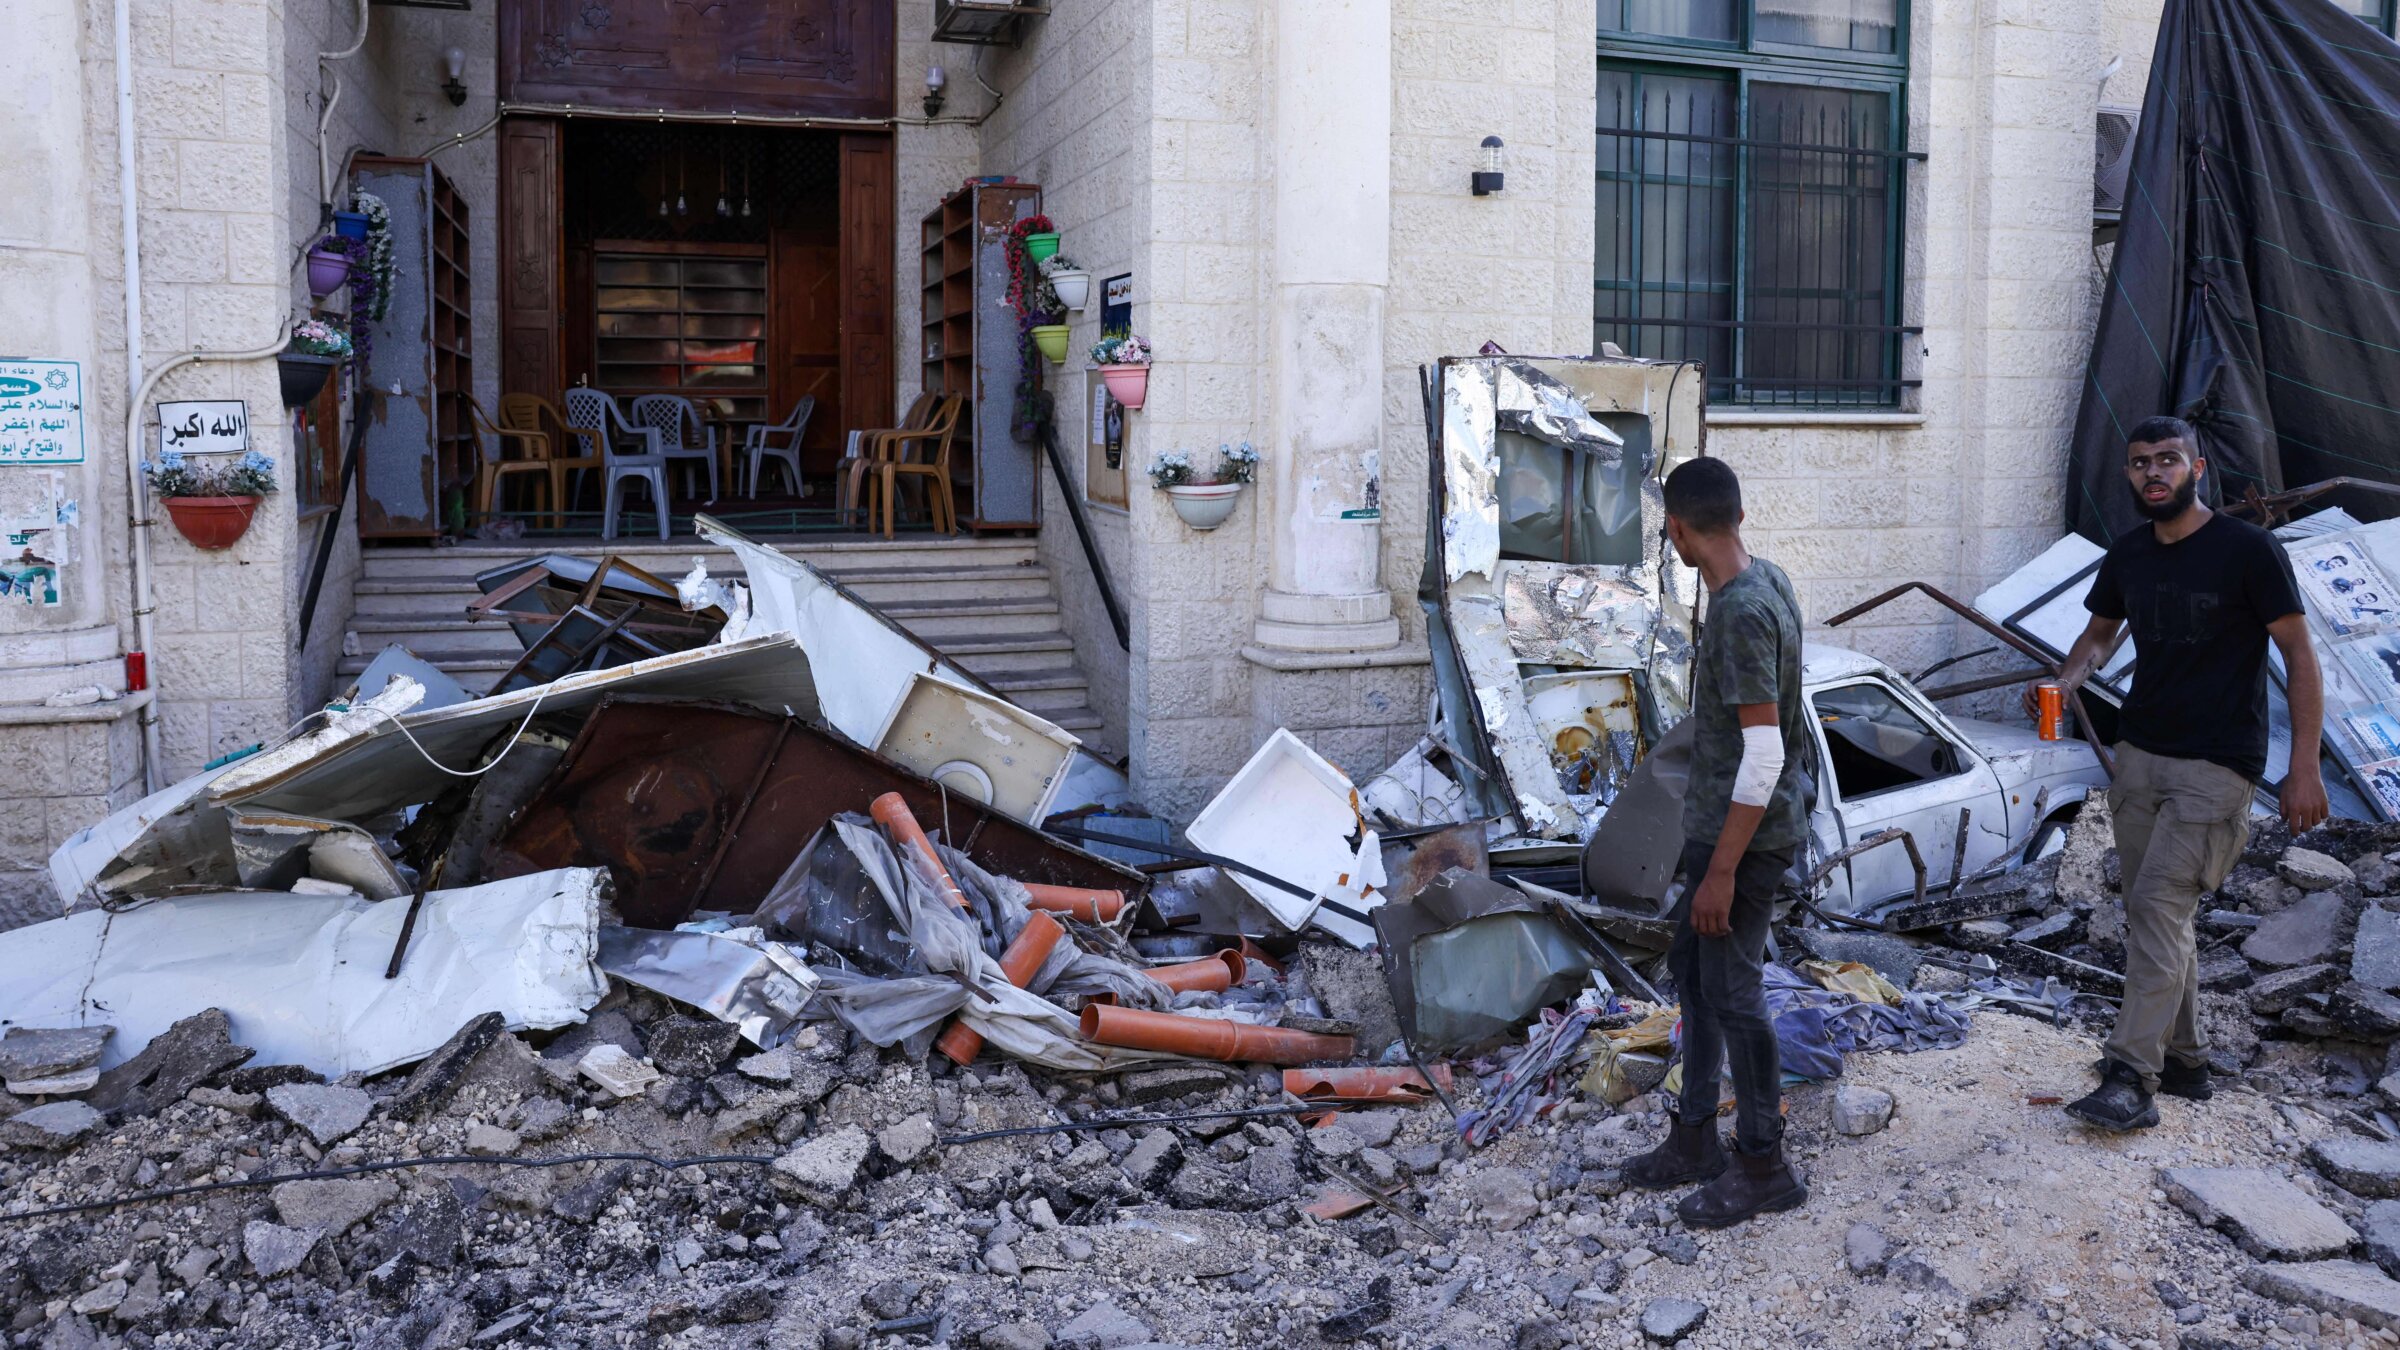 Men walk among rubble in front of a building in the occupied West Bank city of Jenin on July 4, 2023.